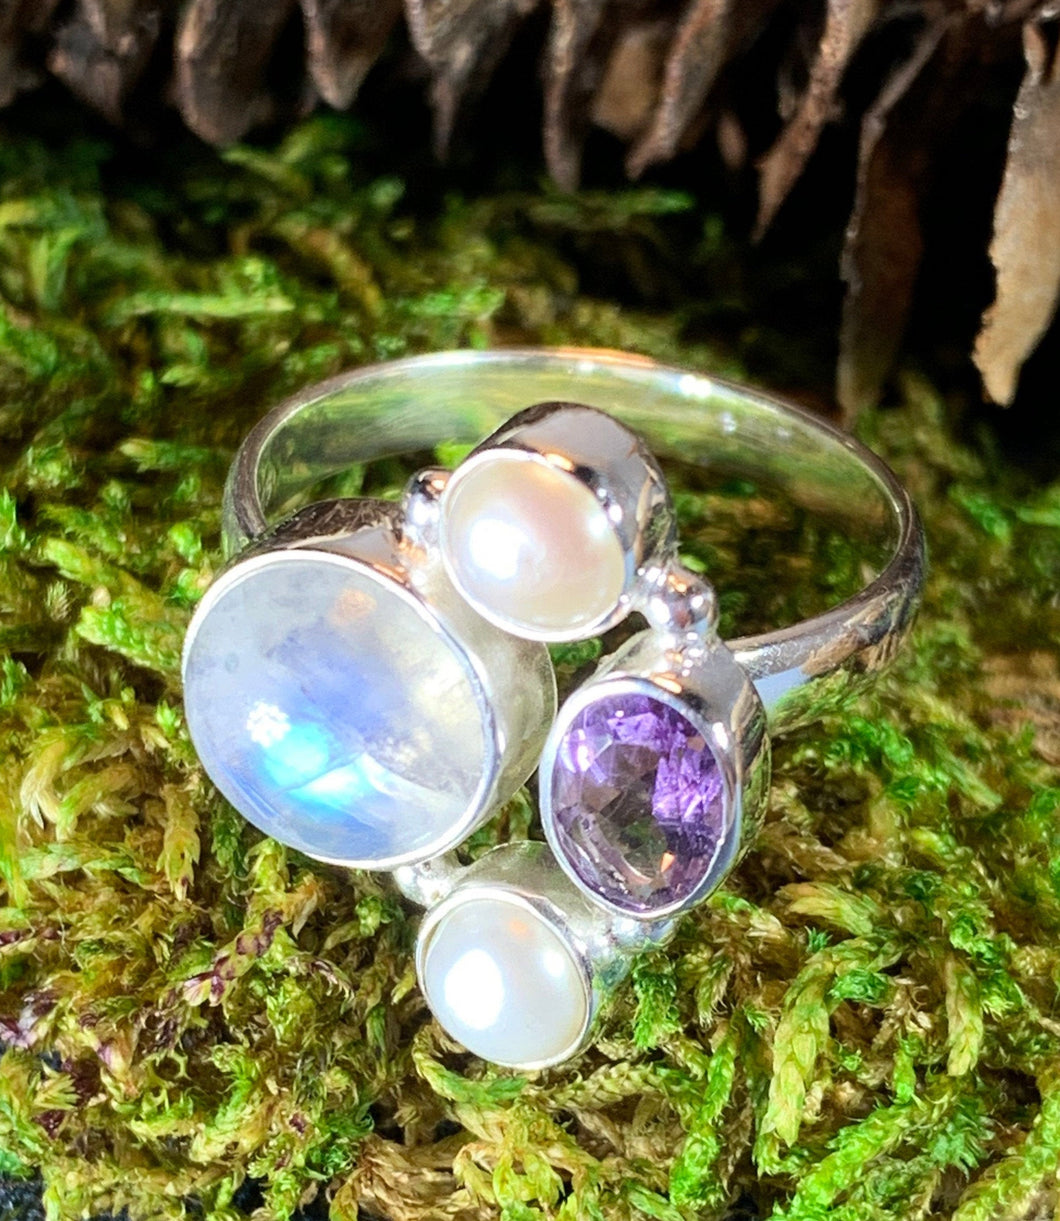 Highland Summer Ring, Celtic Jewelry, Opal Ring, Gemstone Jewelry, Scotland Ring, Wiccan Jewelry, Anniversary Gift, Moonstone Ring, Mom Gift